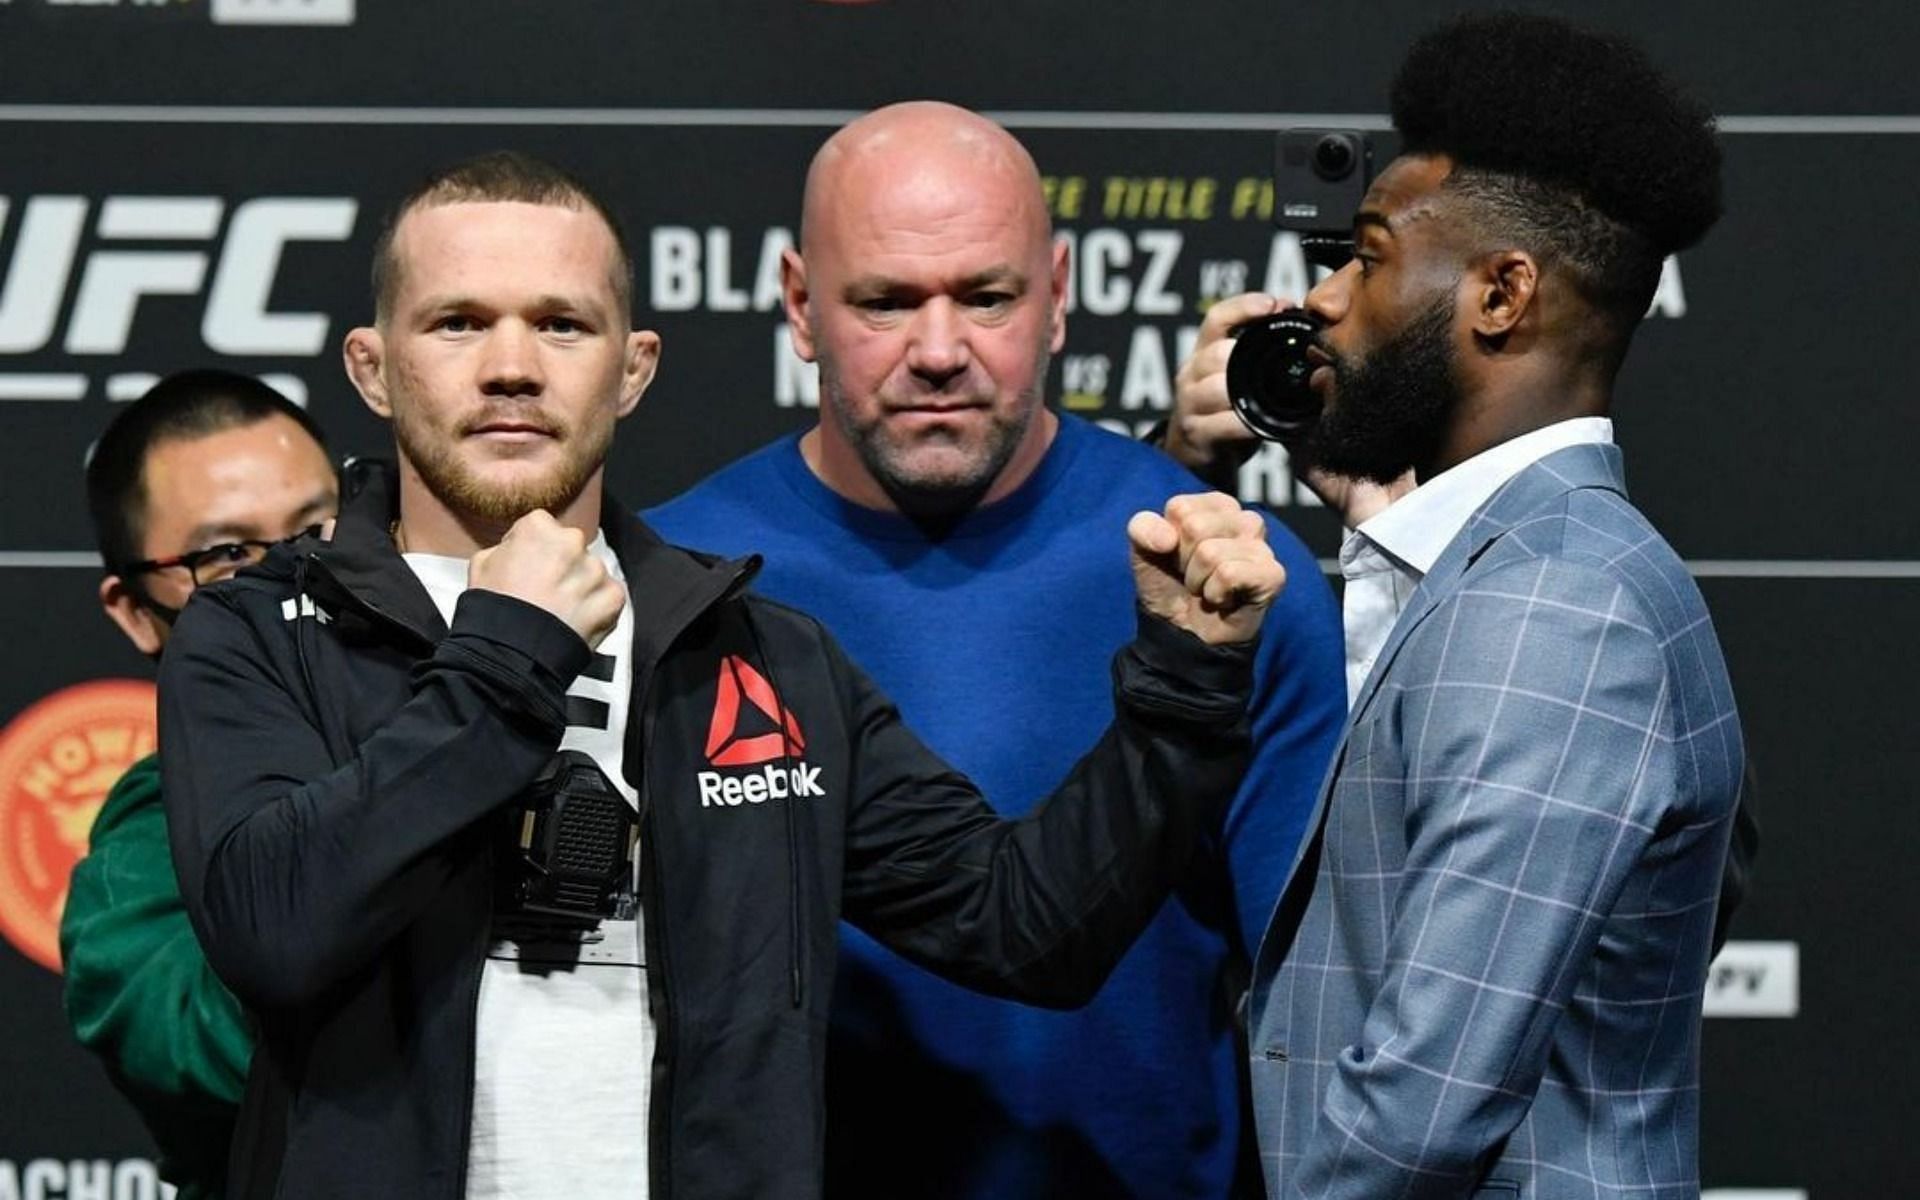 Aljamain Sterling (right) faces off with Petr Yan (left) after the UFC 259 press conference [Image Credit: via @funkmastermma on Instagram]